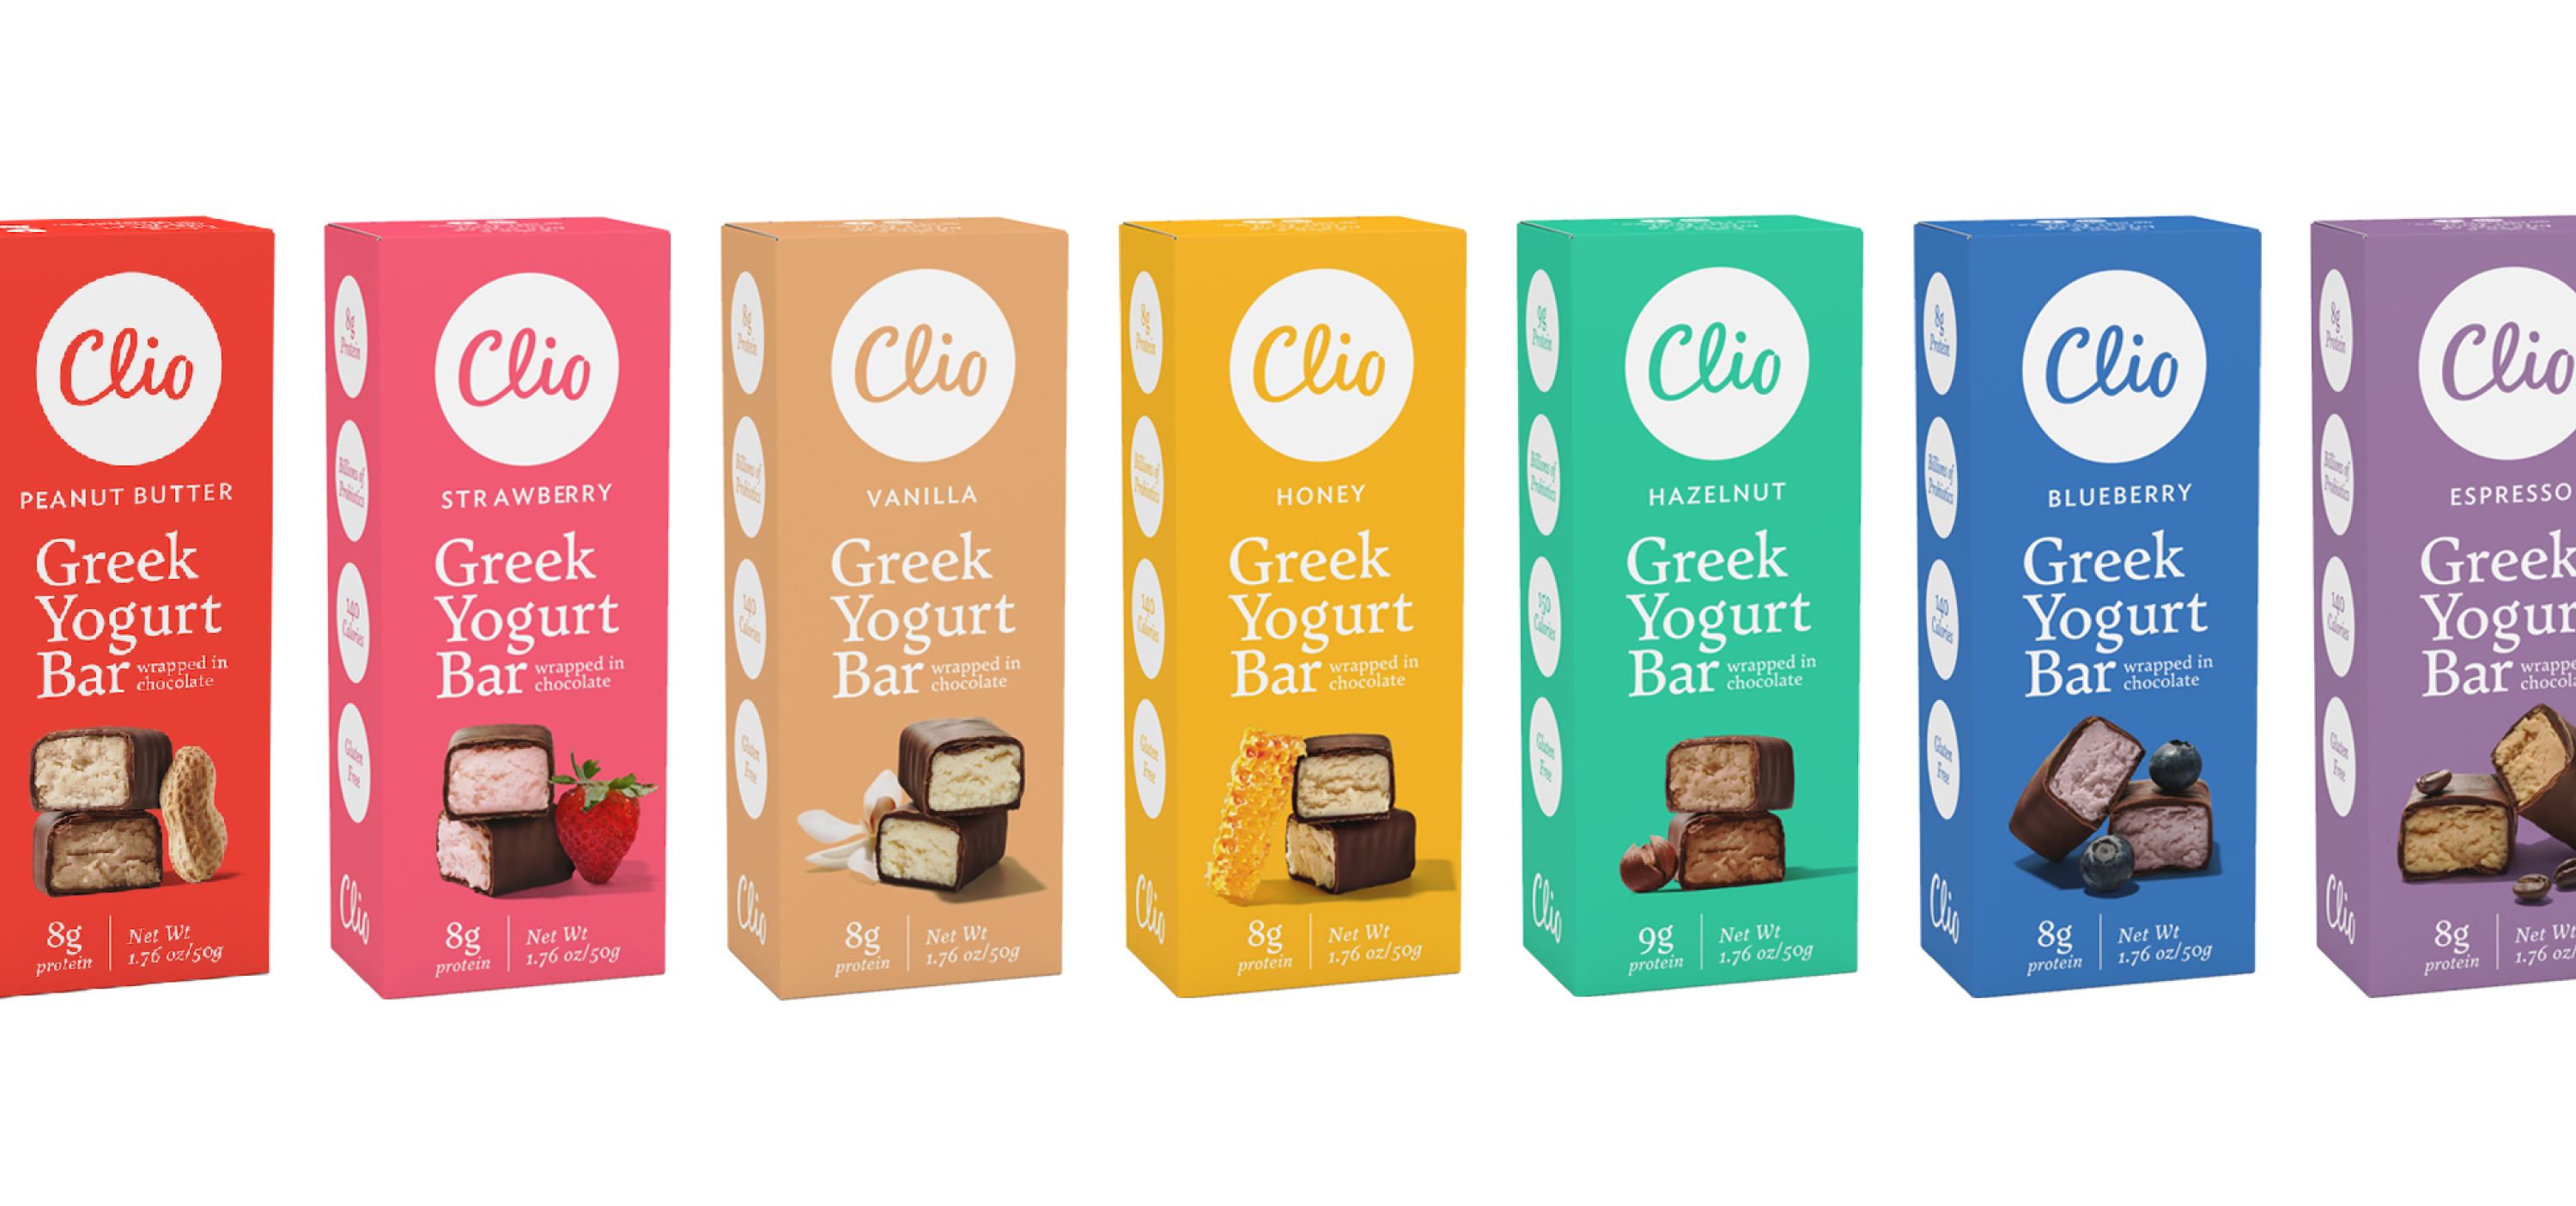 Clio packaging